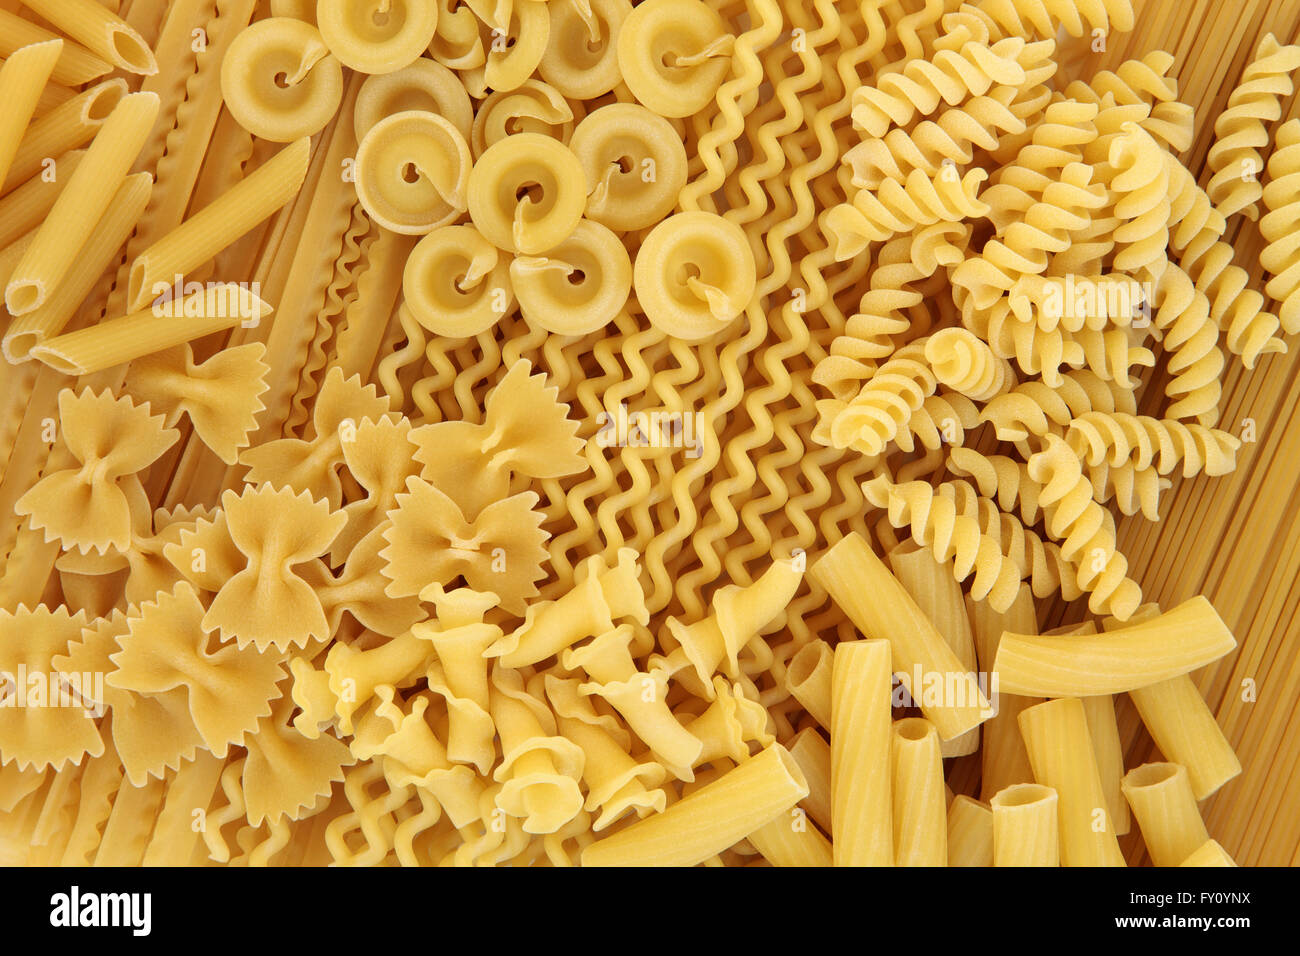 Large pasta food selection forming an abstract background. Stock Photo